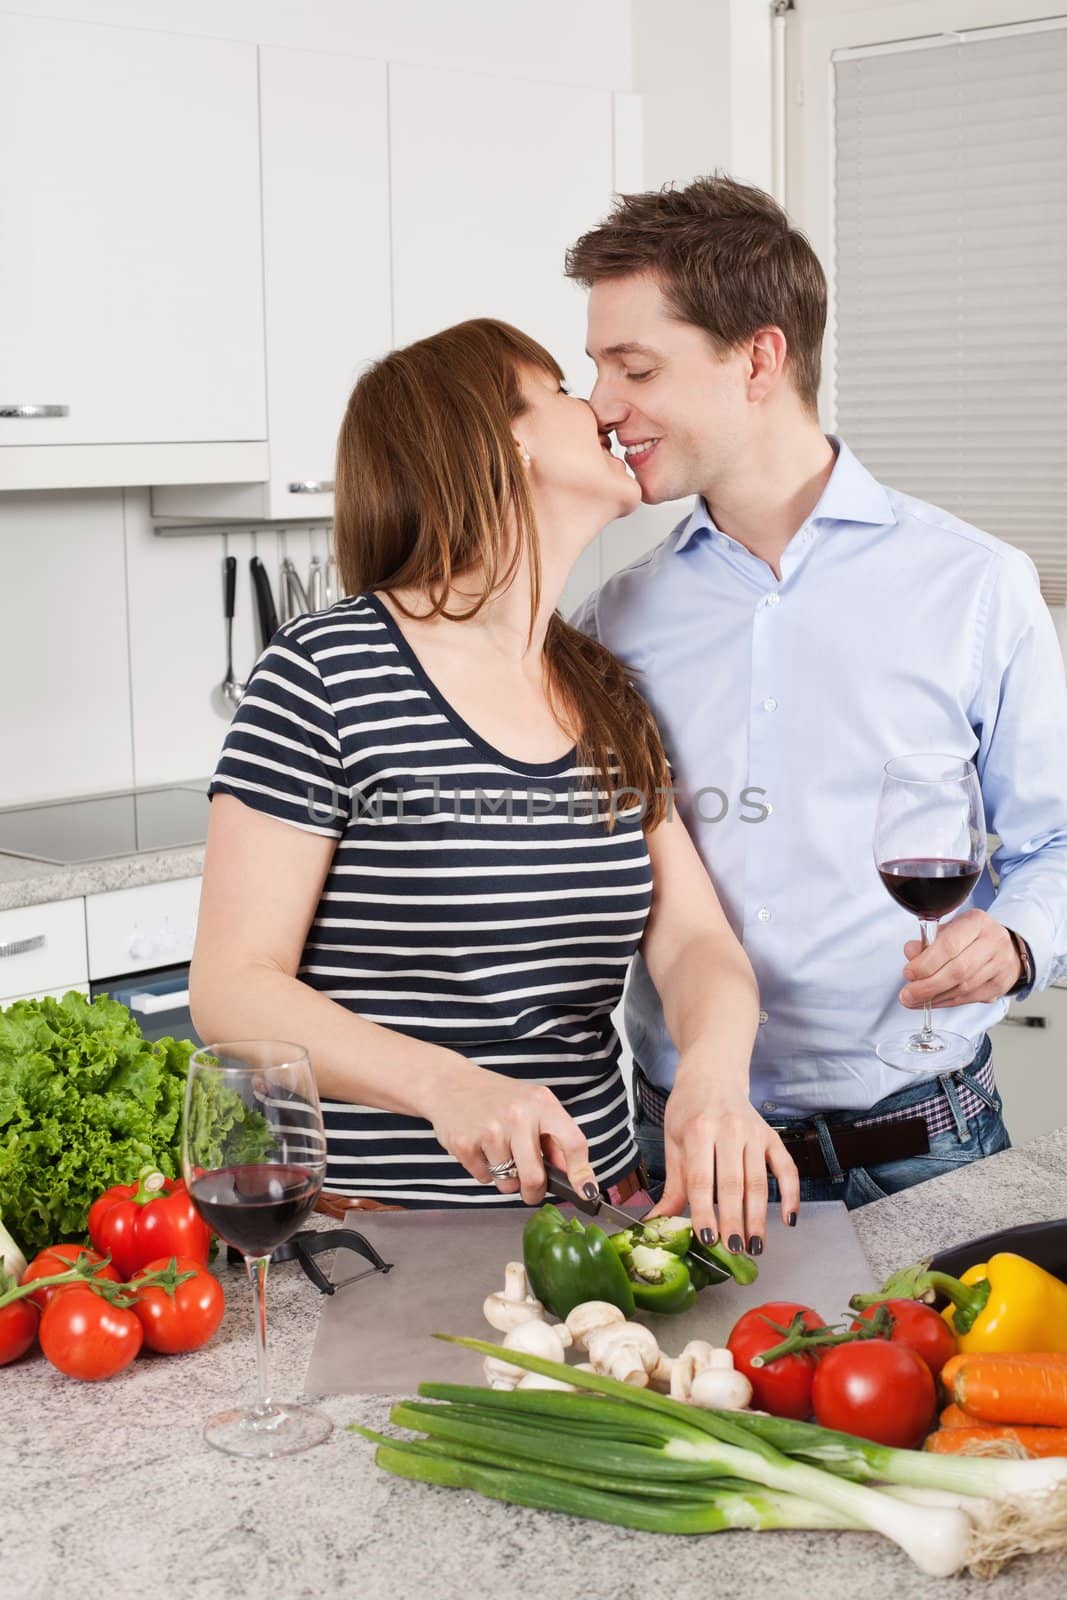 Photo of a young couple preparing salad in their kitchen and drinking wine.